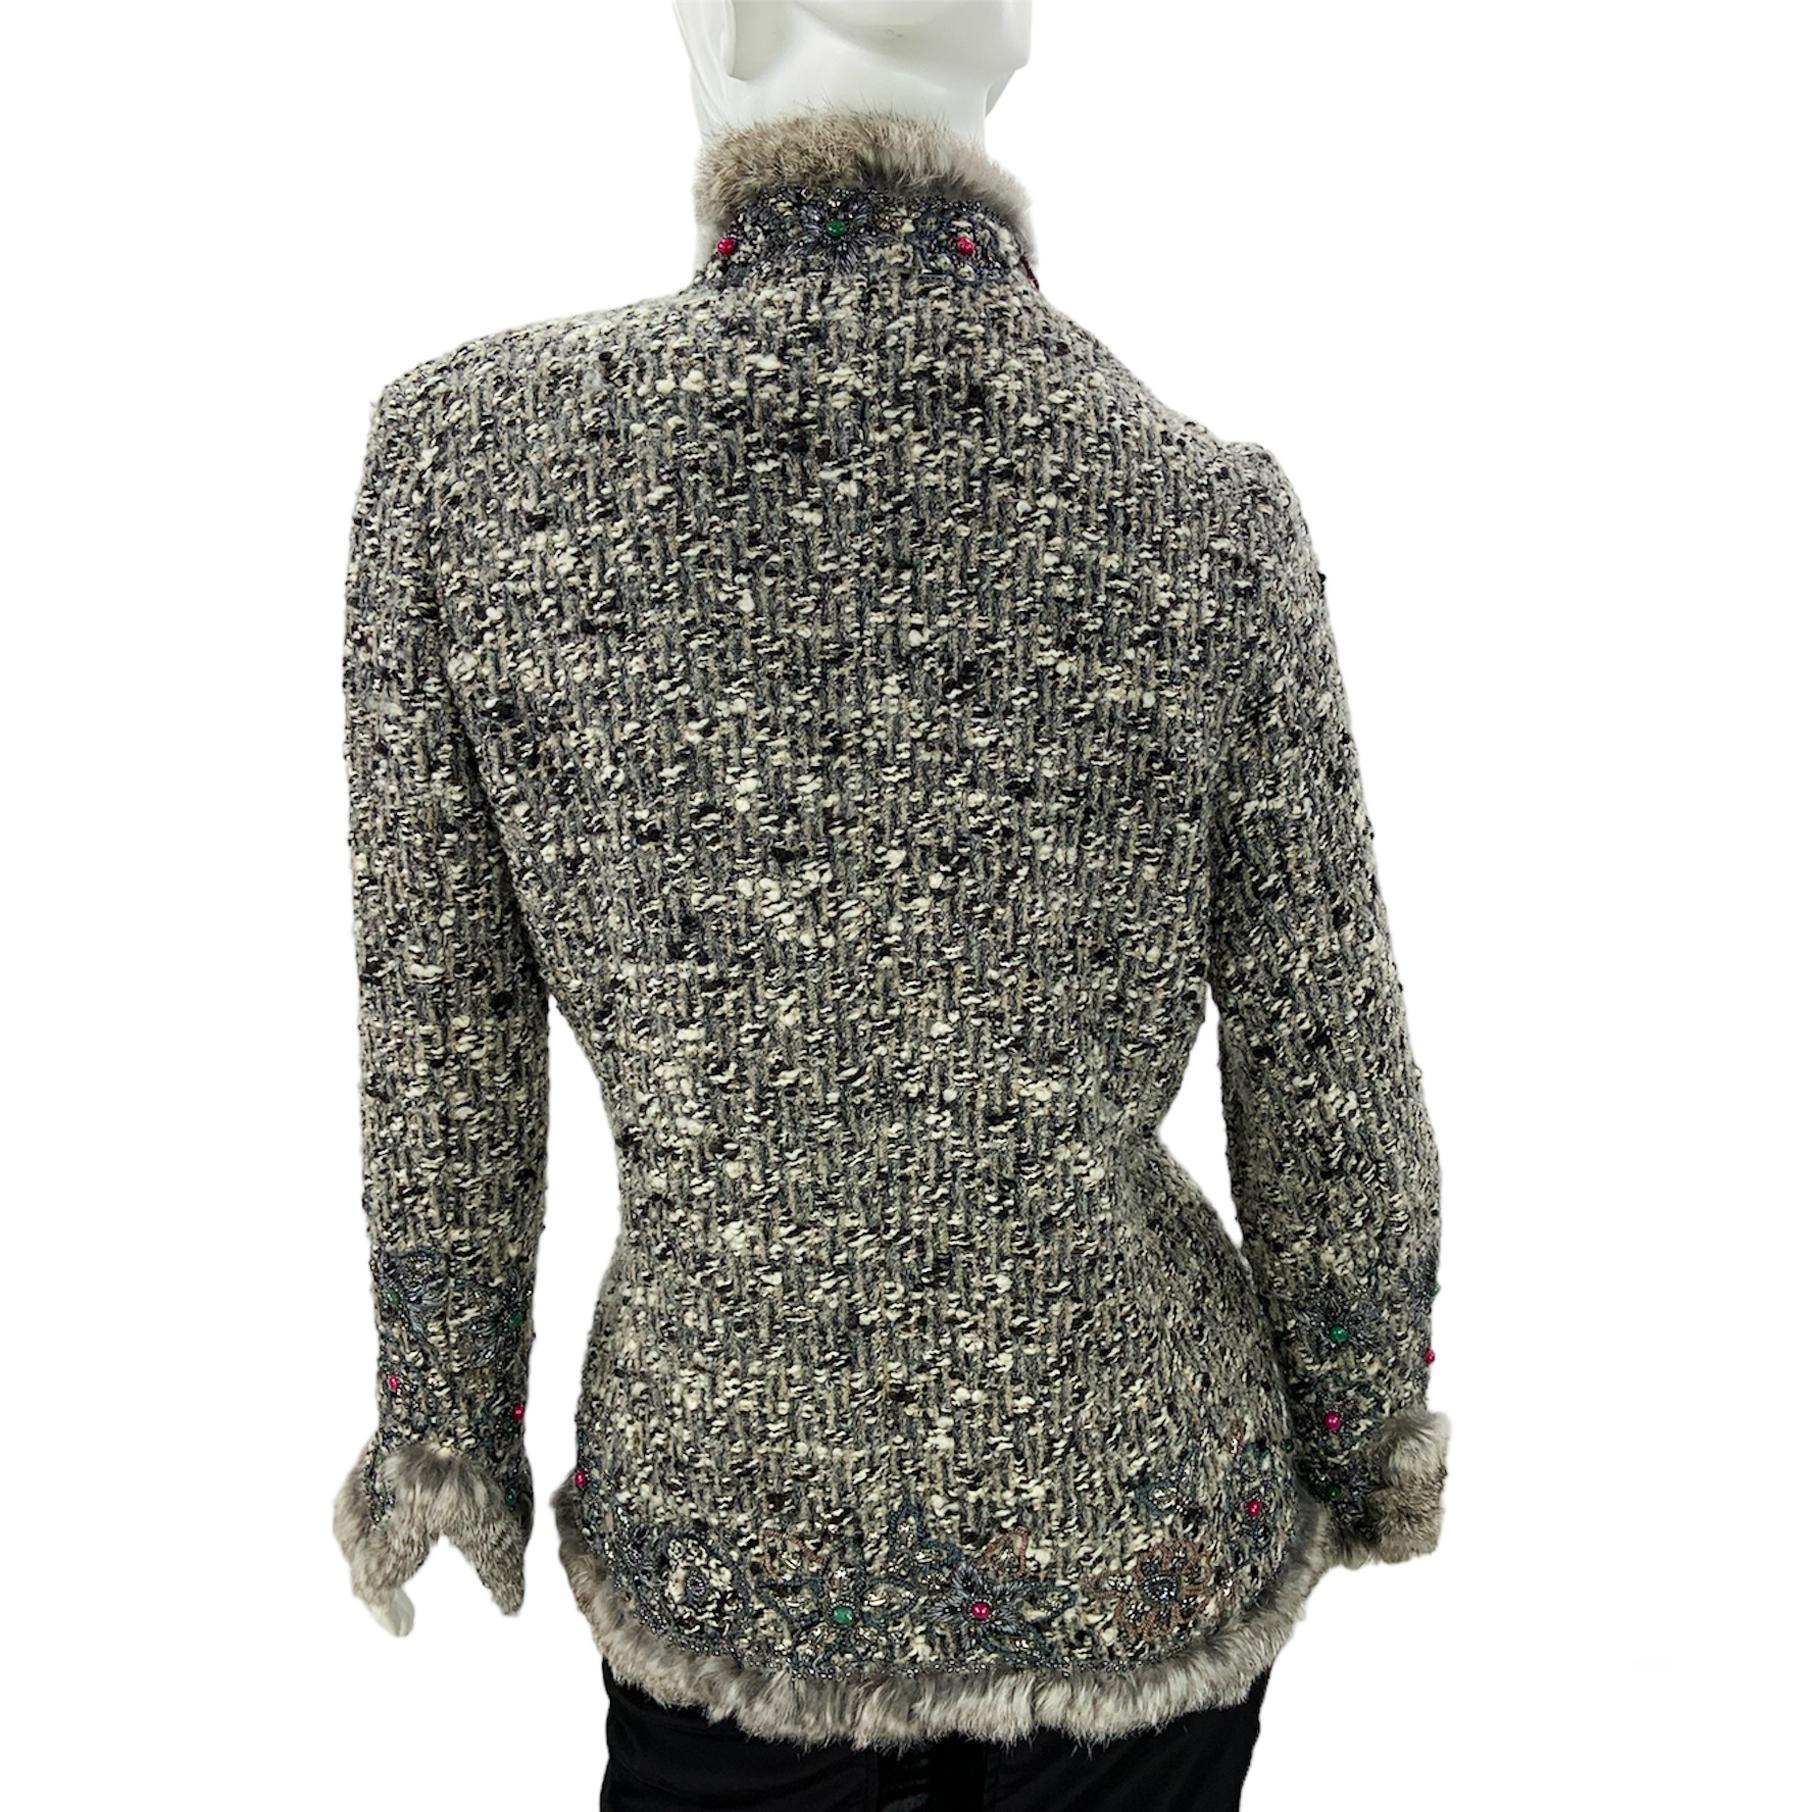 Oscar de la Renta Campaign Runway Hand Embellished Fur Boucle Wool Jacket US 10 In Excellent Condition For Sale In Montgomery, TX